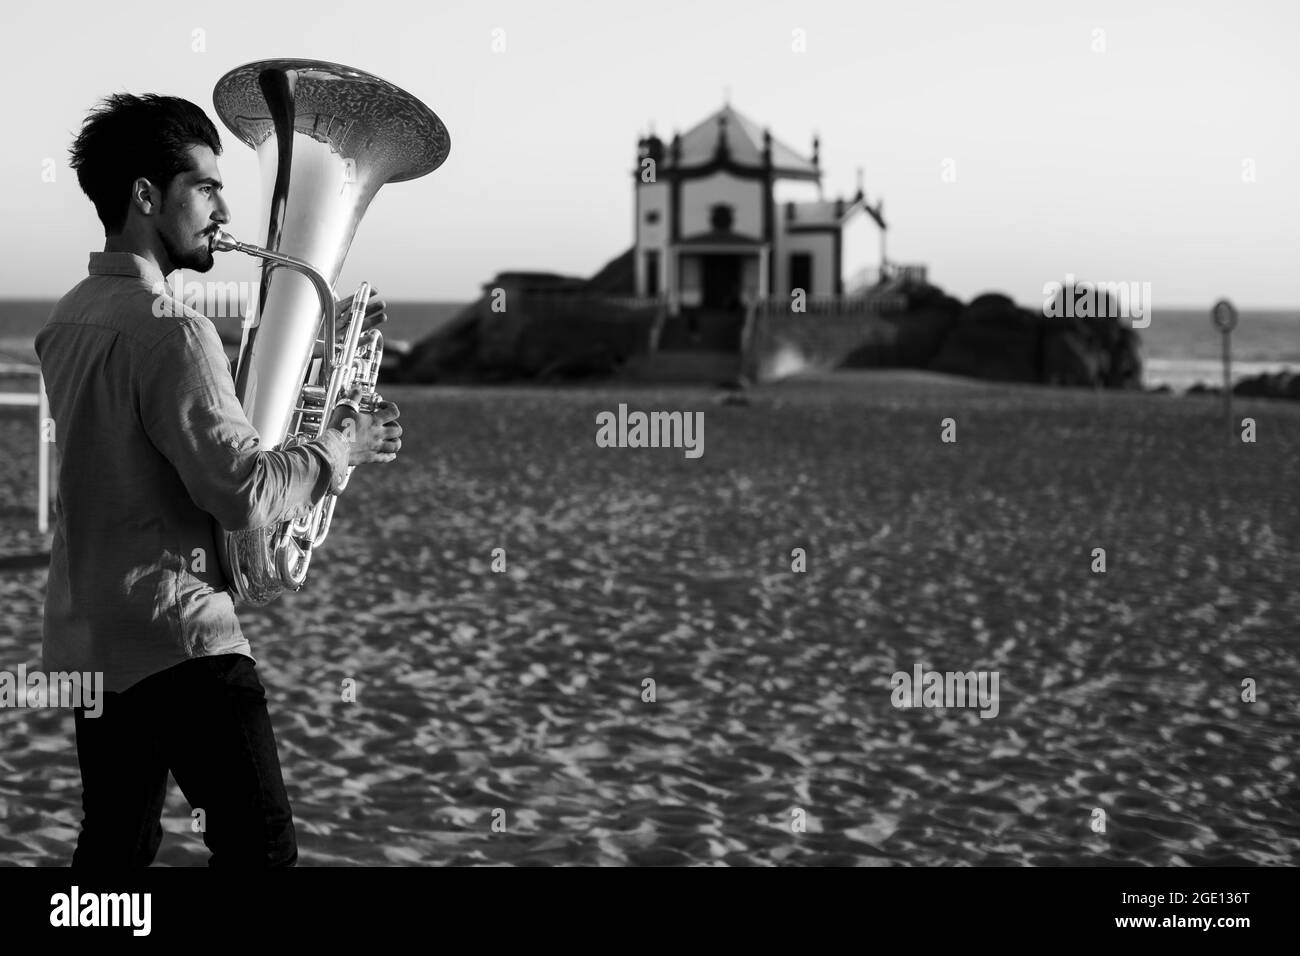 A musician with a tuba on the Miramar Beach, Portugal. Black and white photo. Stock Photo